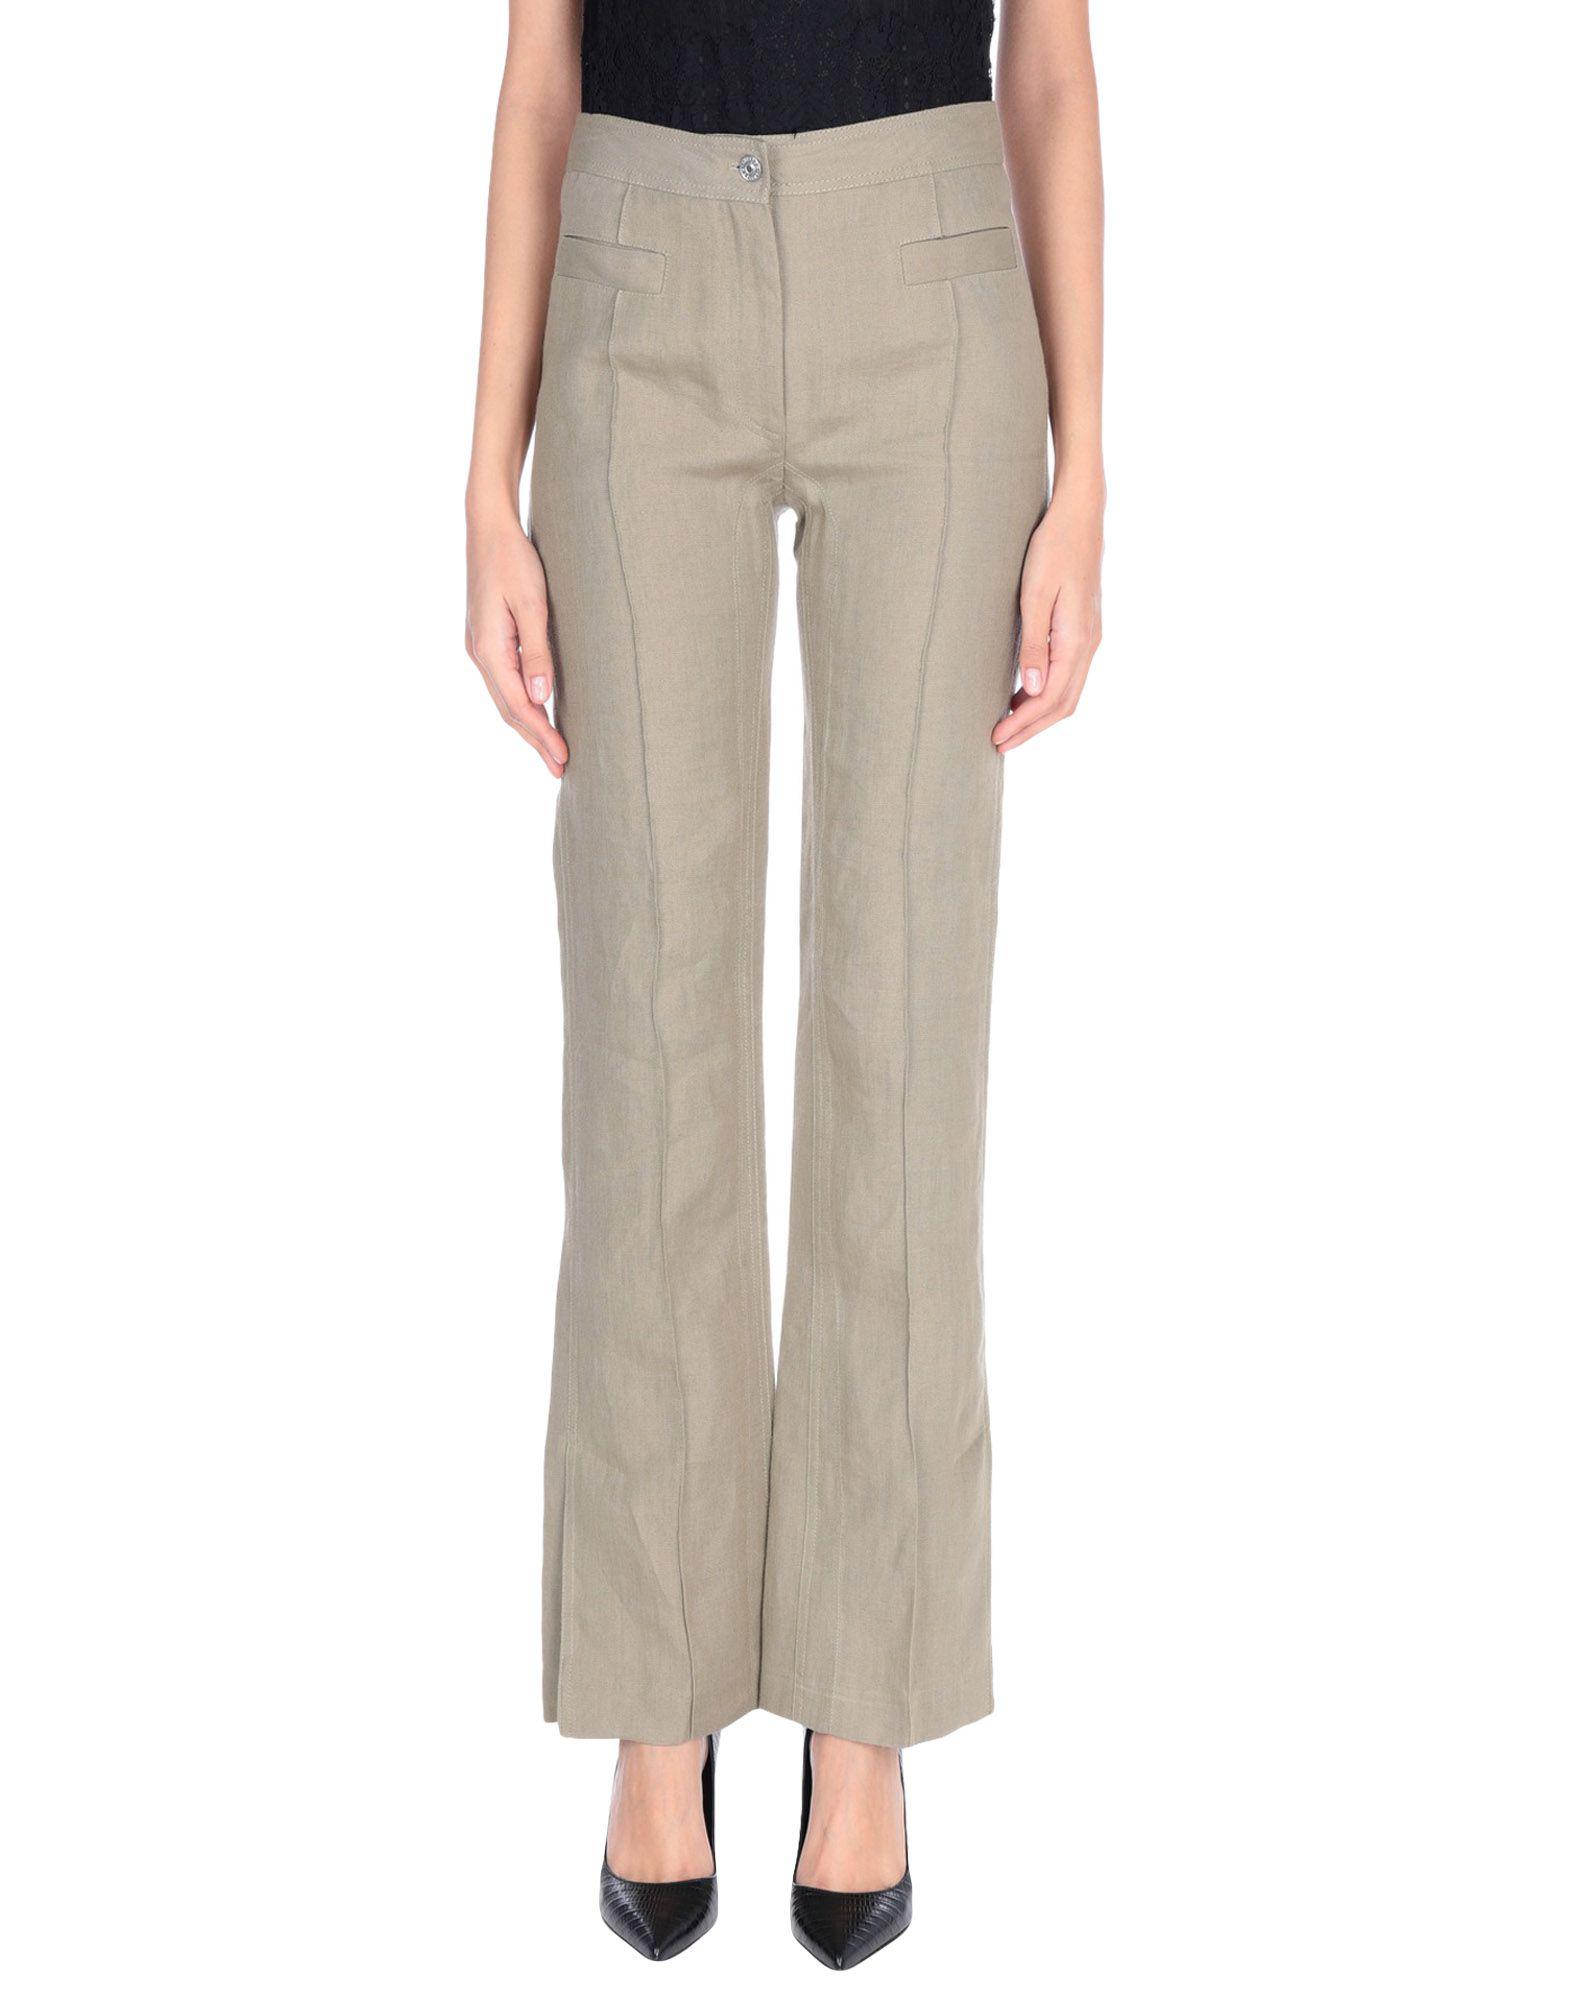 Céline Linen Casual Pants in Military Green (Green) - Lyst